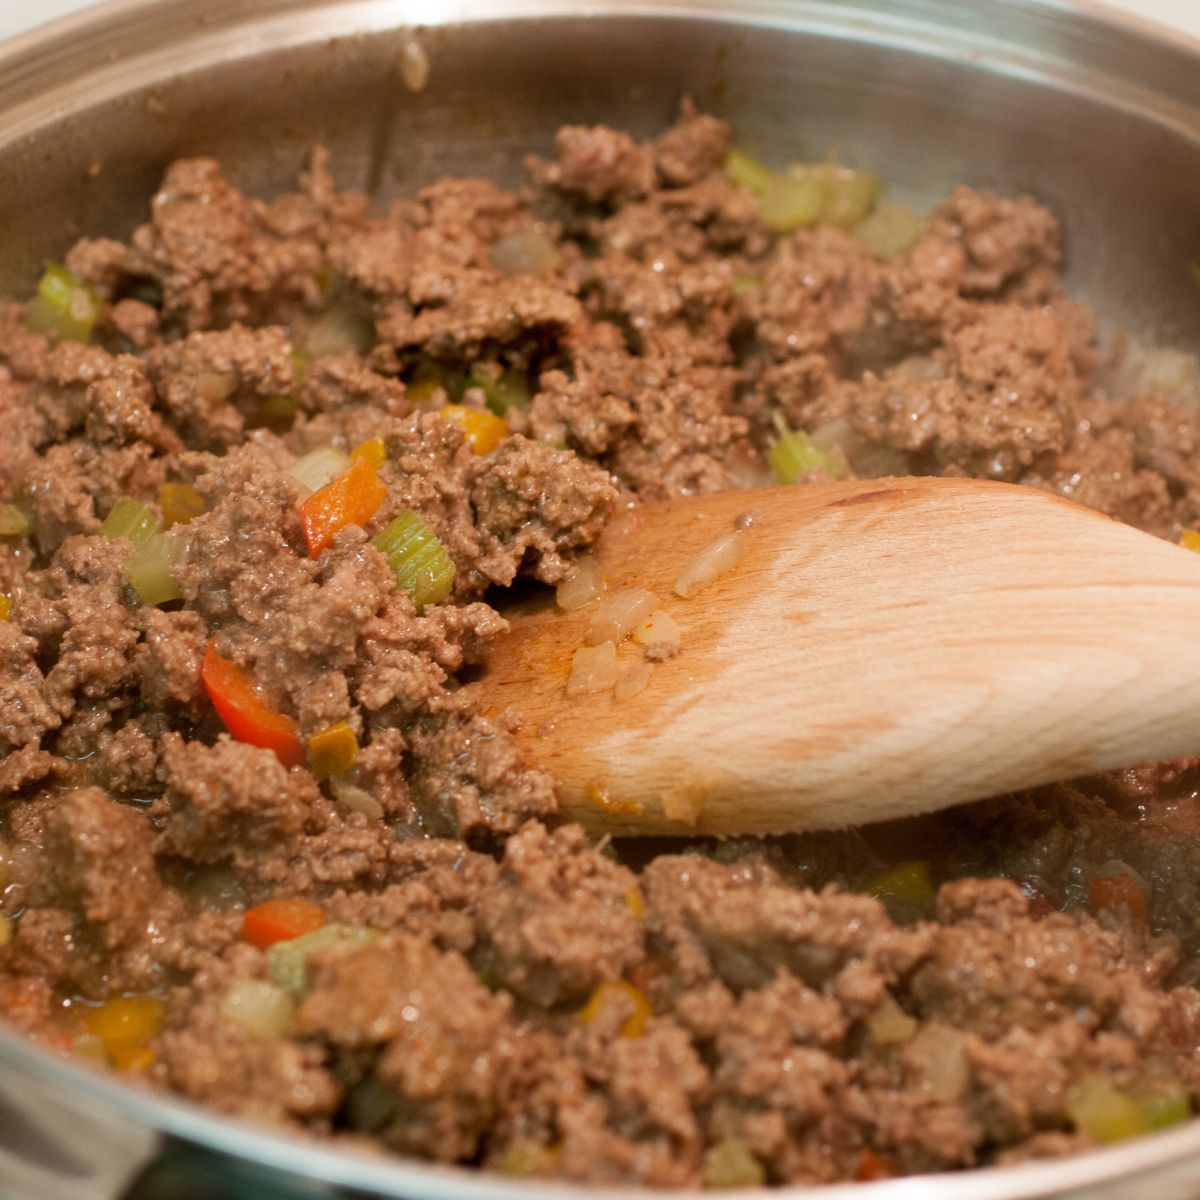 Mexican Ground Beef Skillet